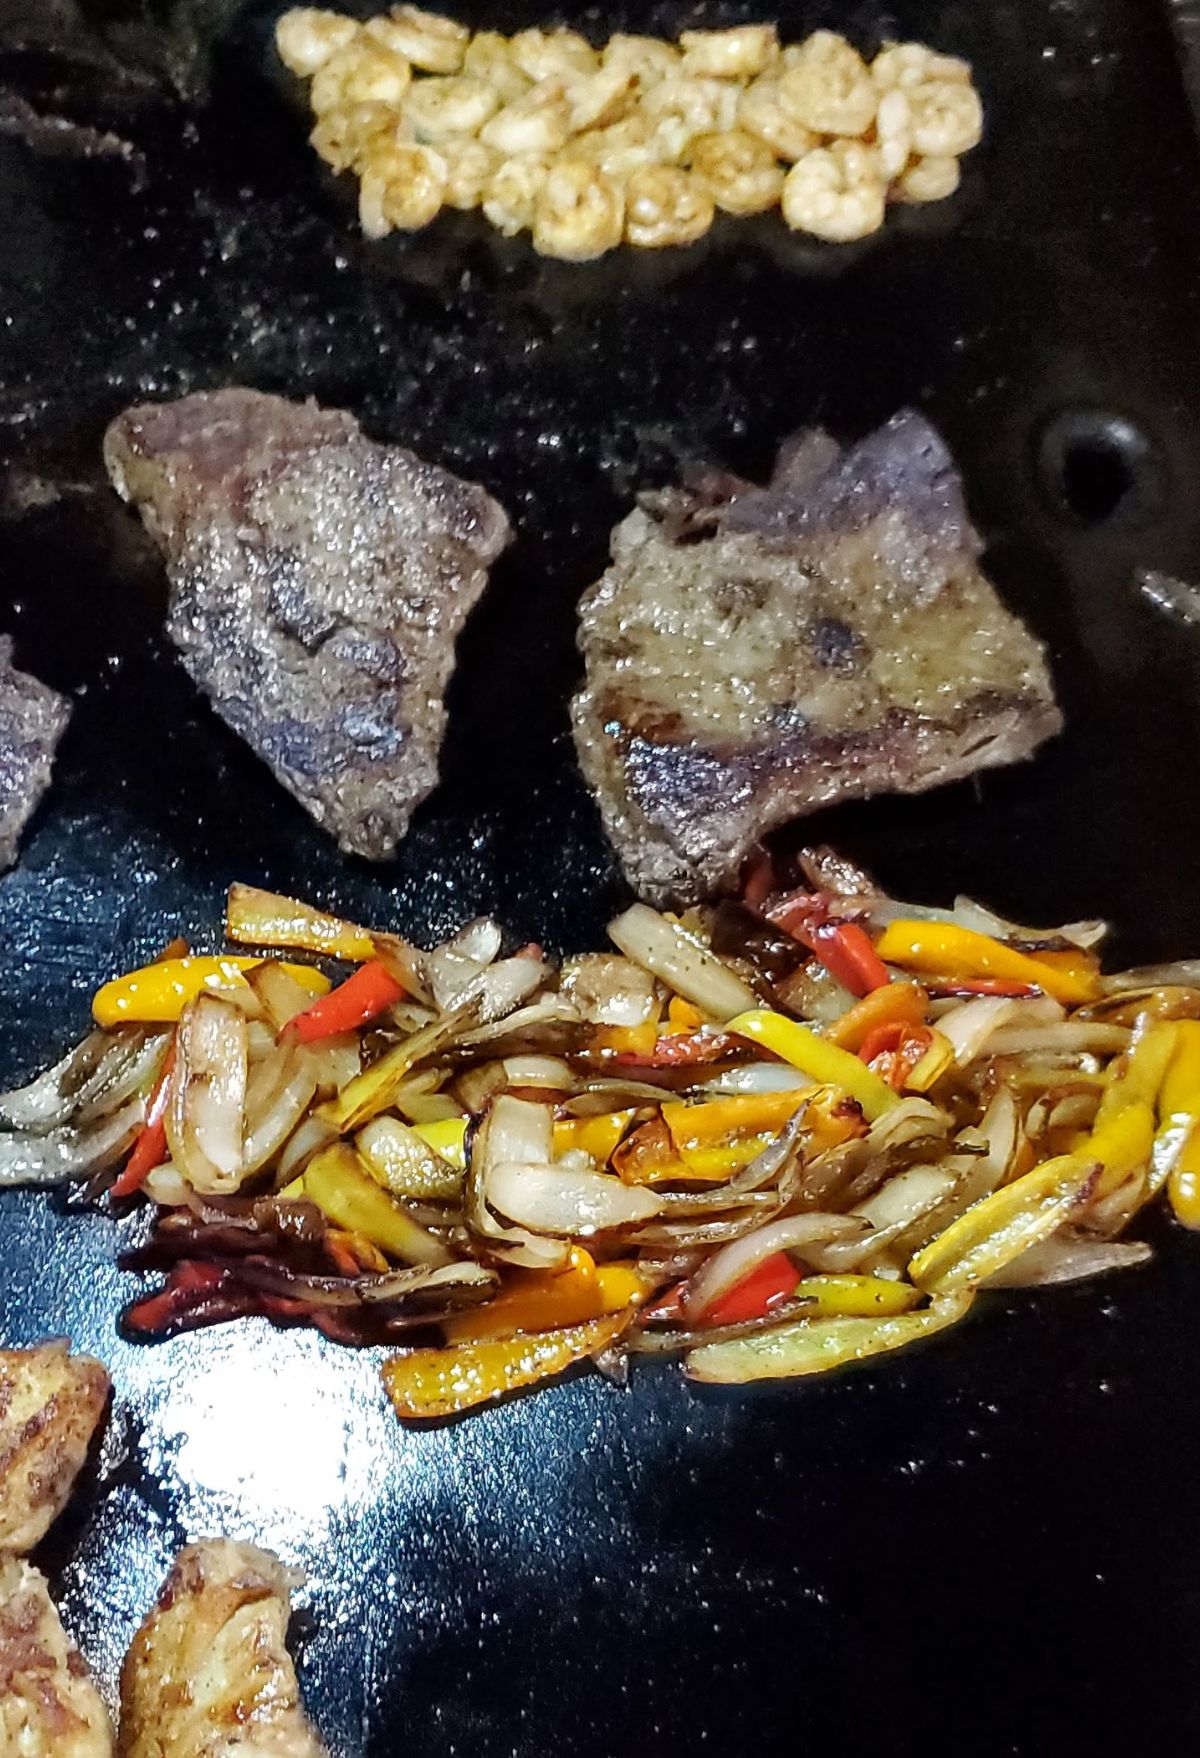 Sauteed vegetables and slices of beef on a black frying pan.